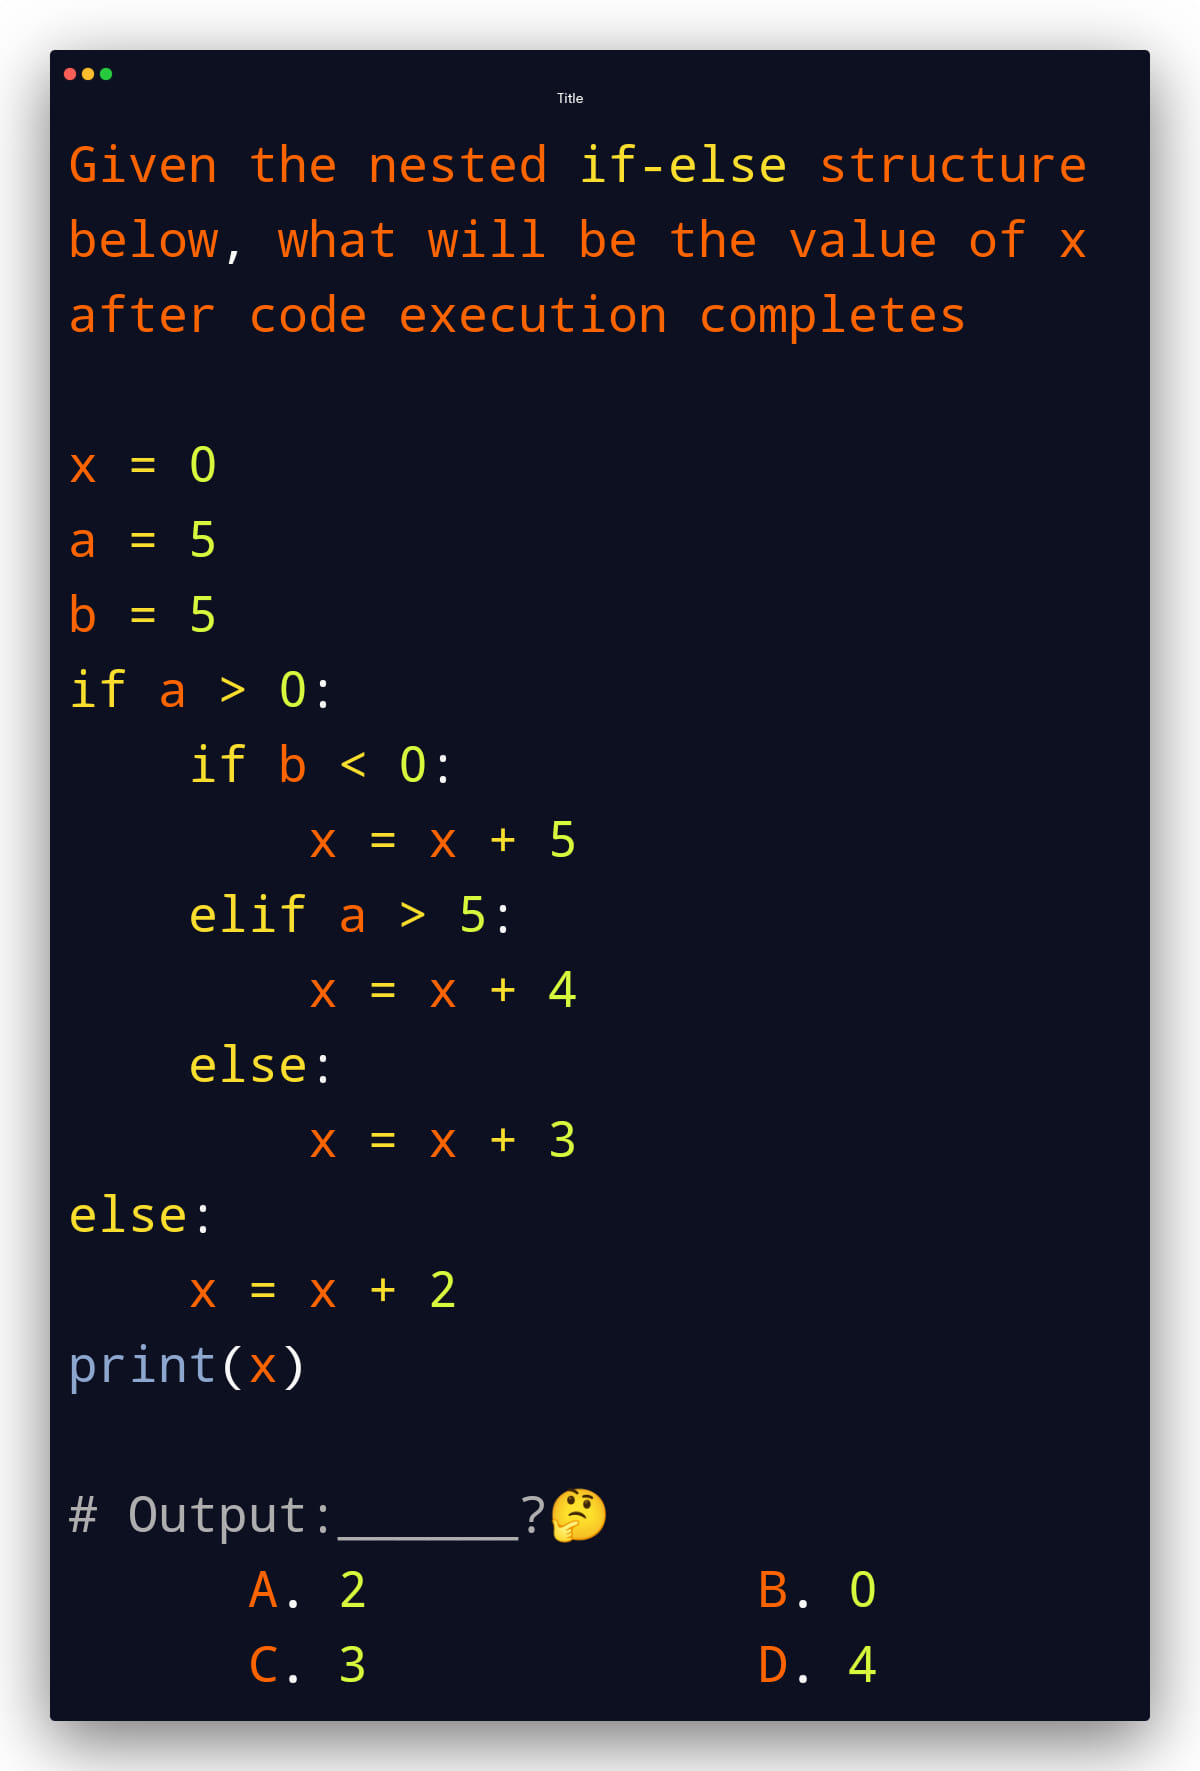 What is the output of this code?